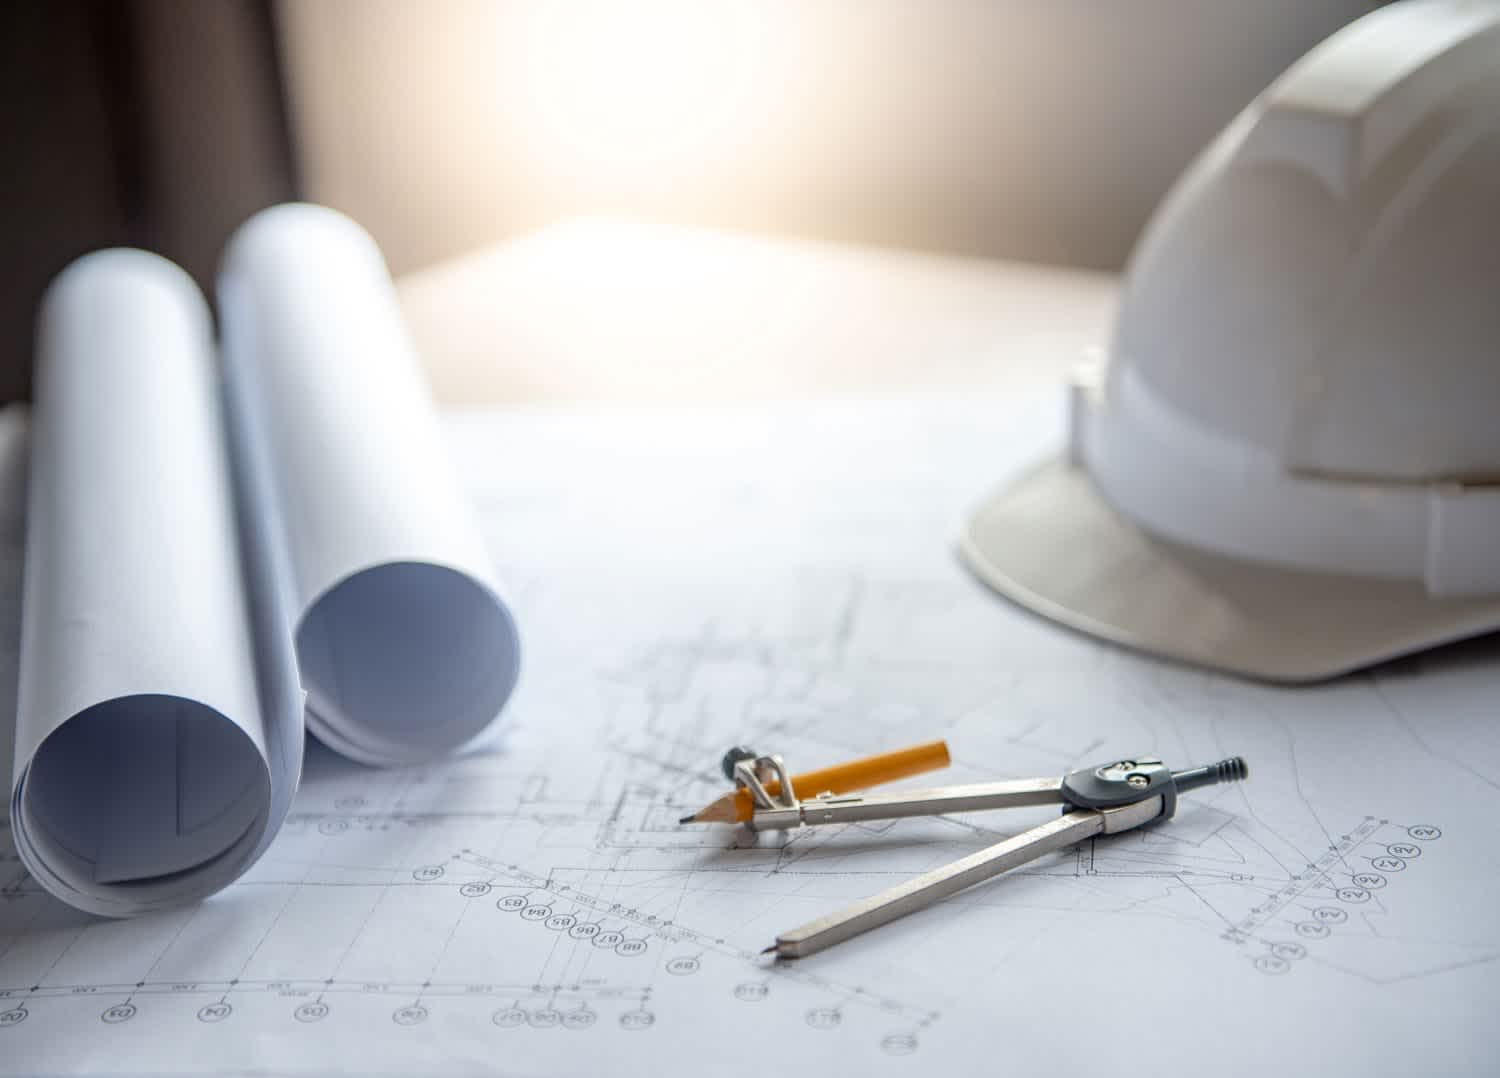 Building Plans, Compass, and Hard Hat